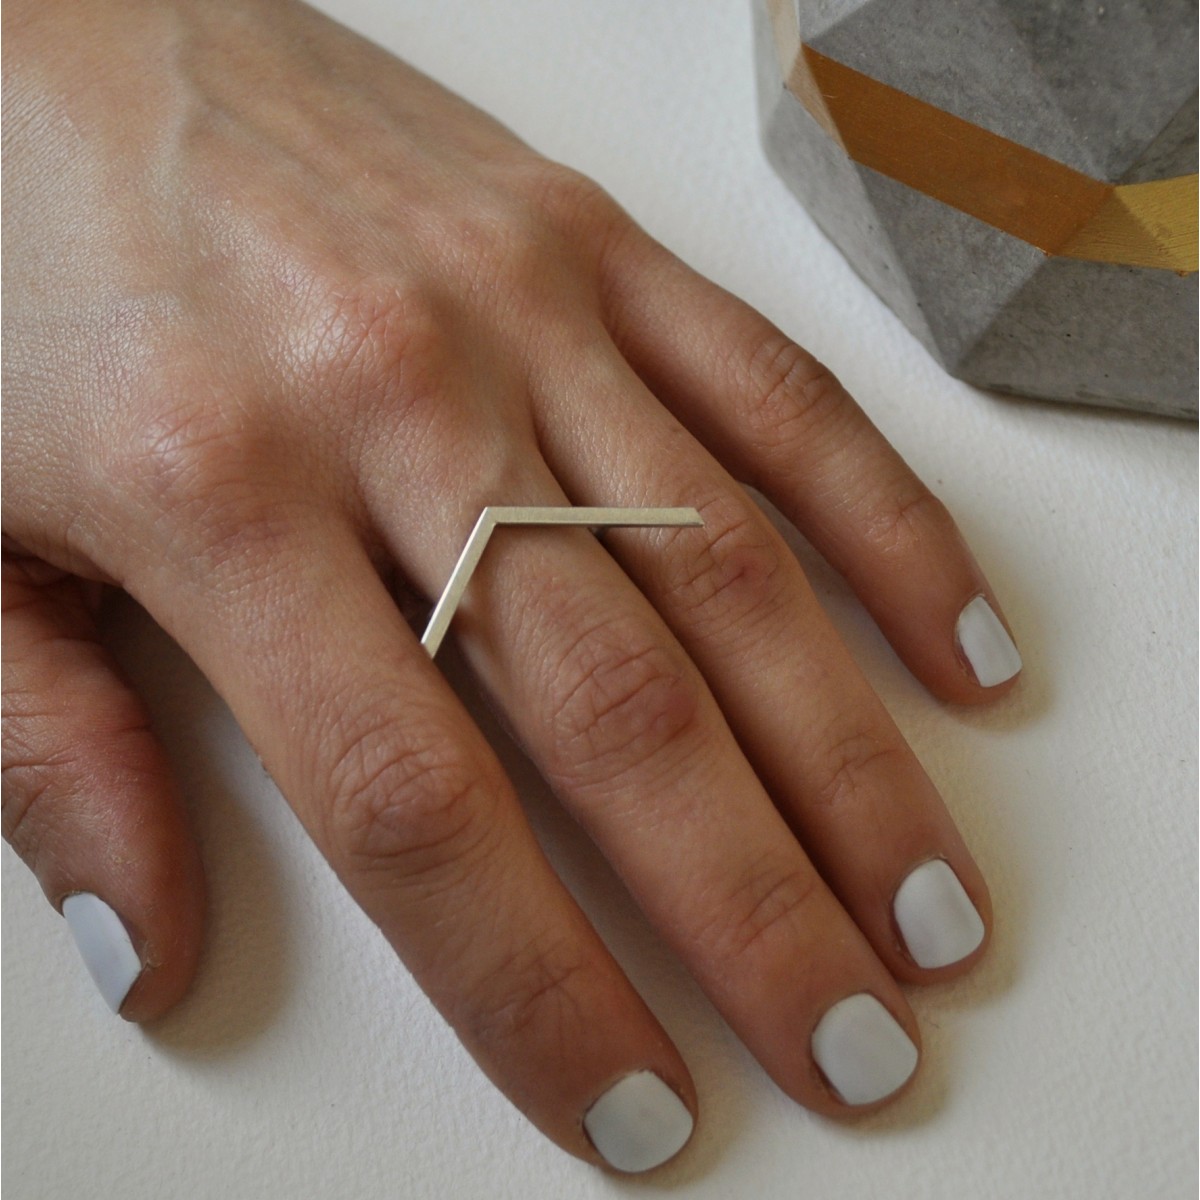 DOPPELLUDWIG – Ring "GEKNICKT" 
aus 925/- Silber